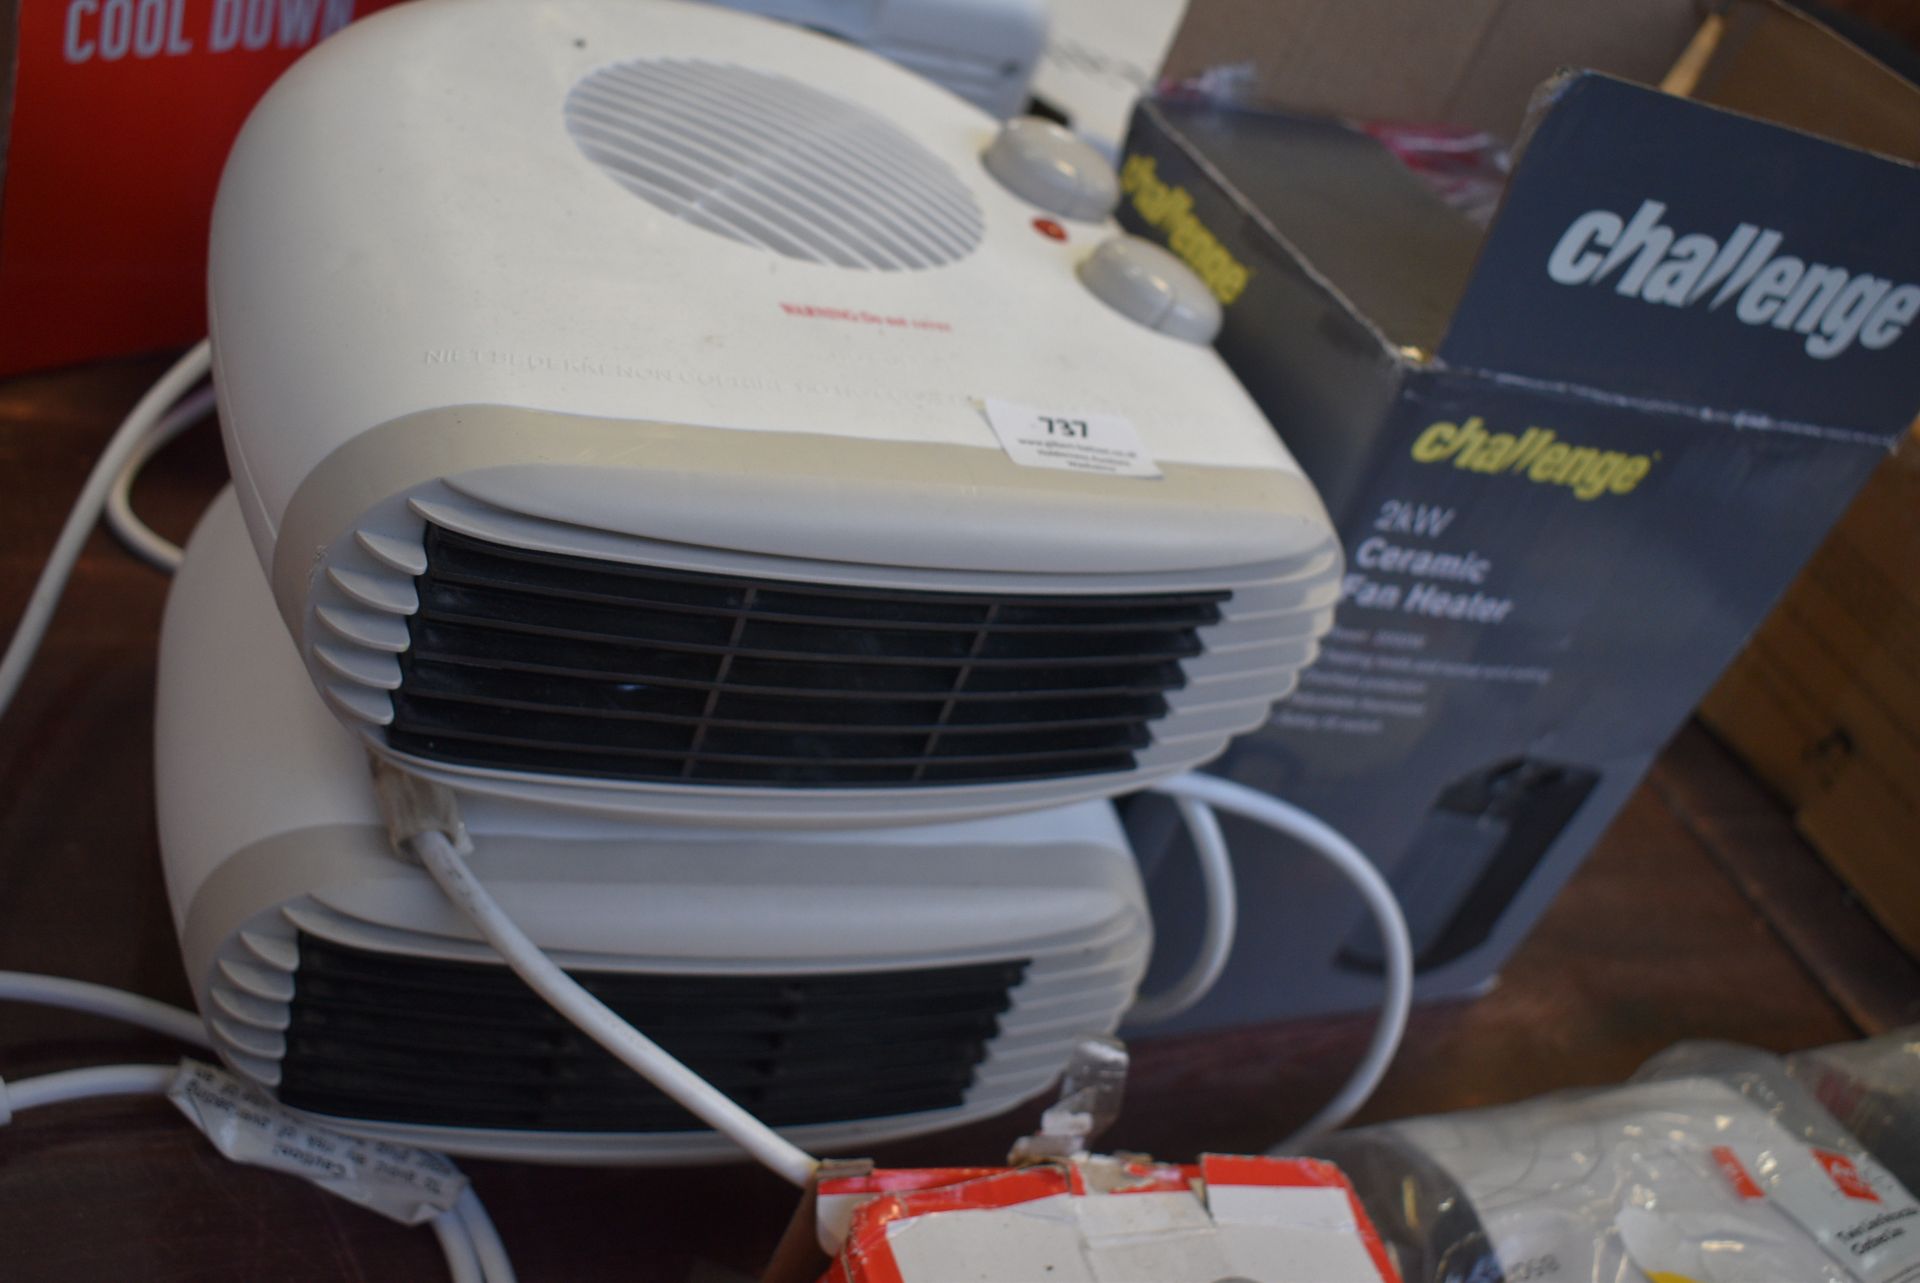 Challenge Ceramic Fan Heater and Two Under Desk Heaters